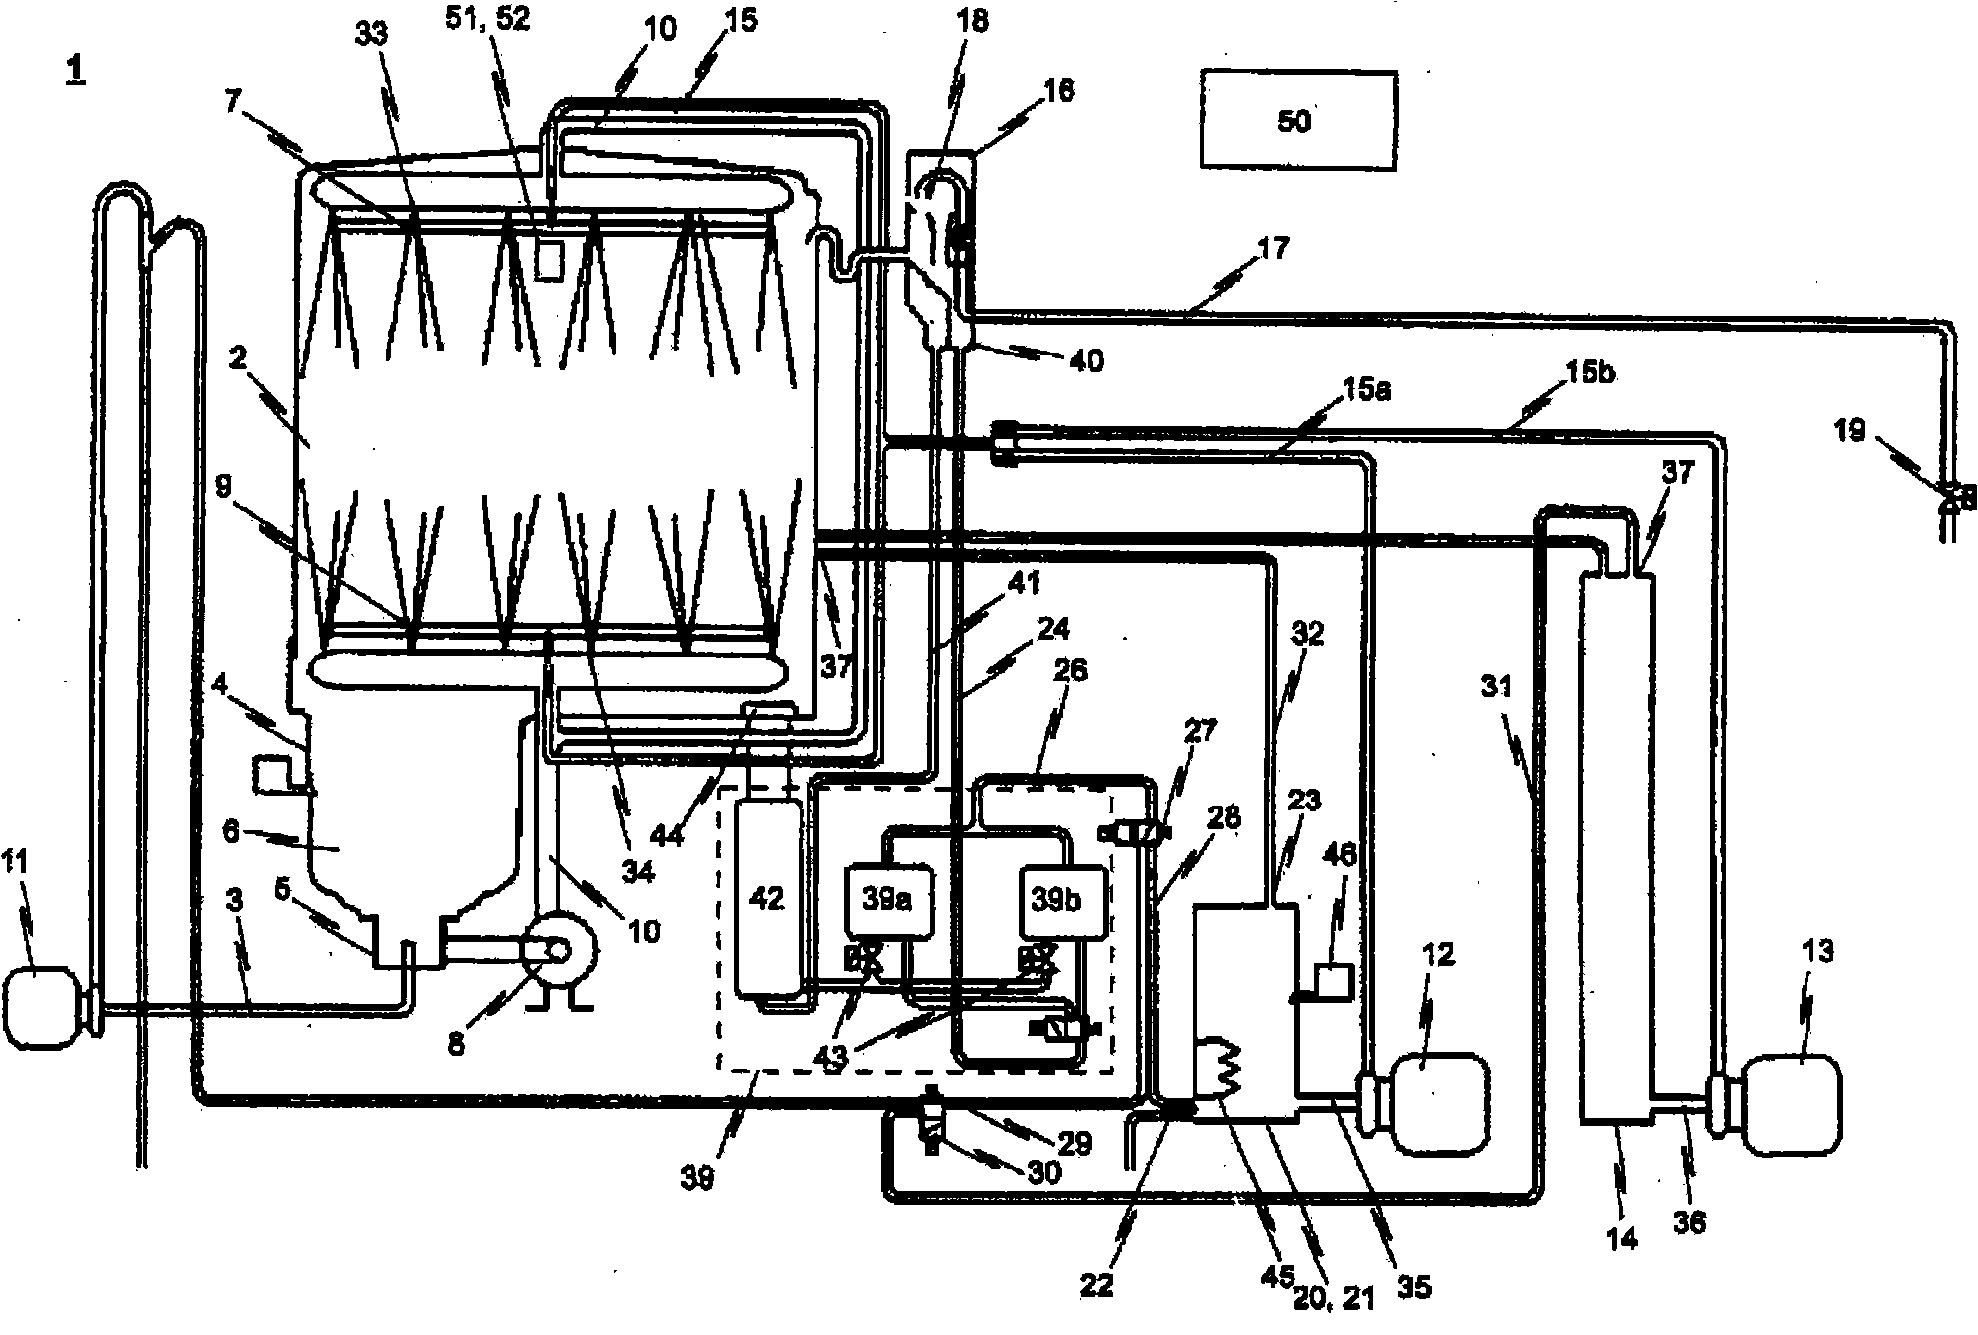 Dishwasher and method for cleaning wash ware